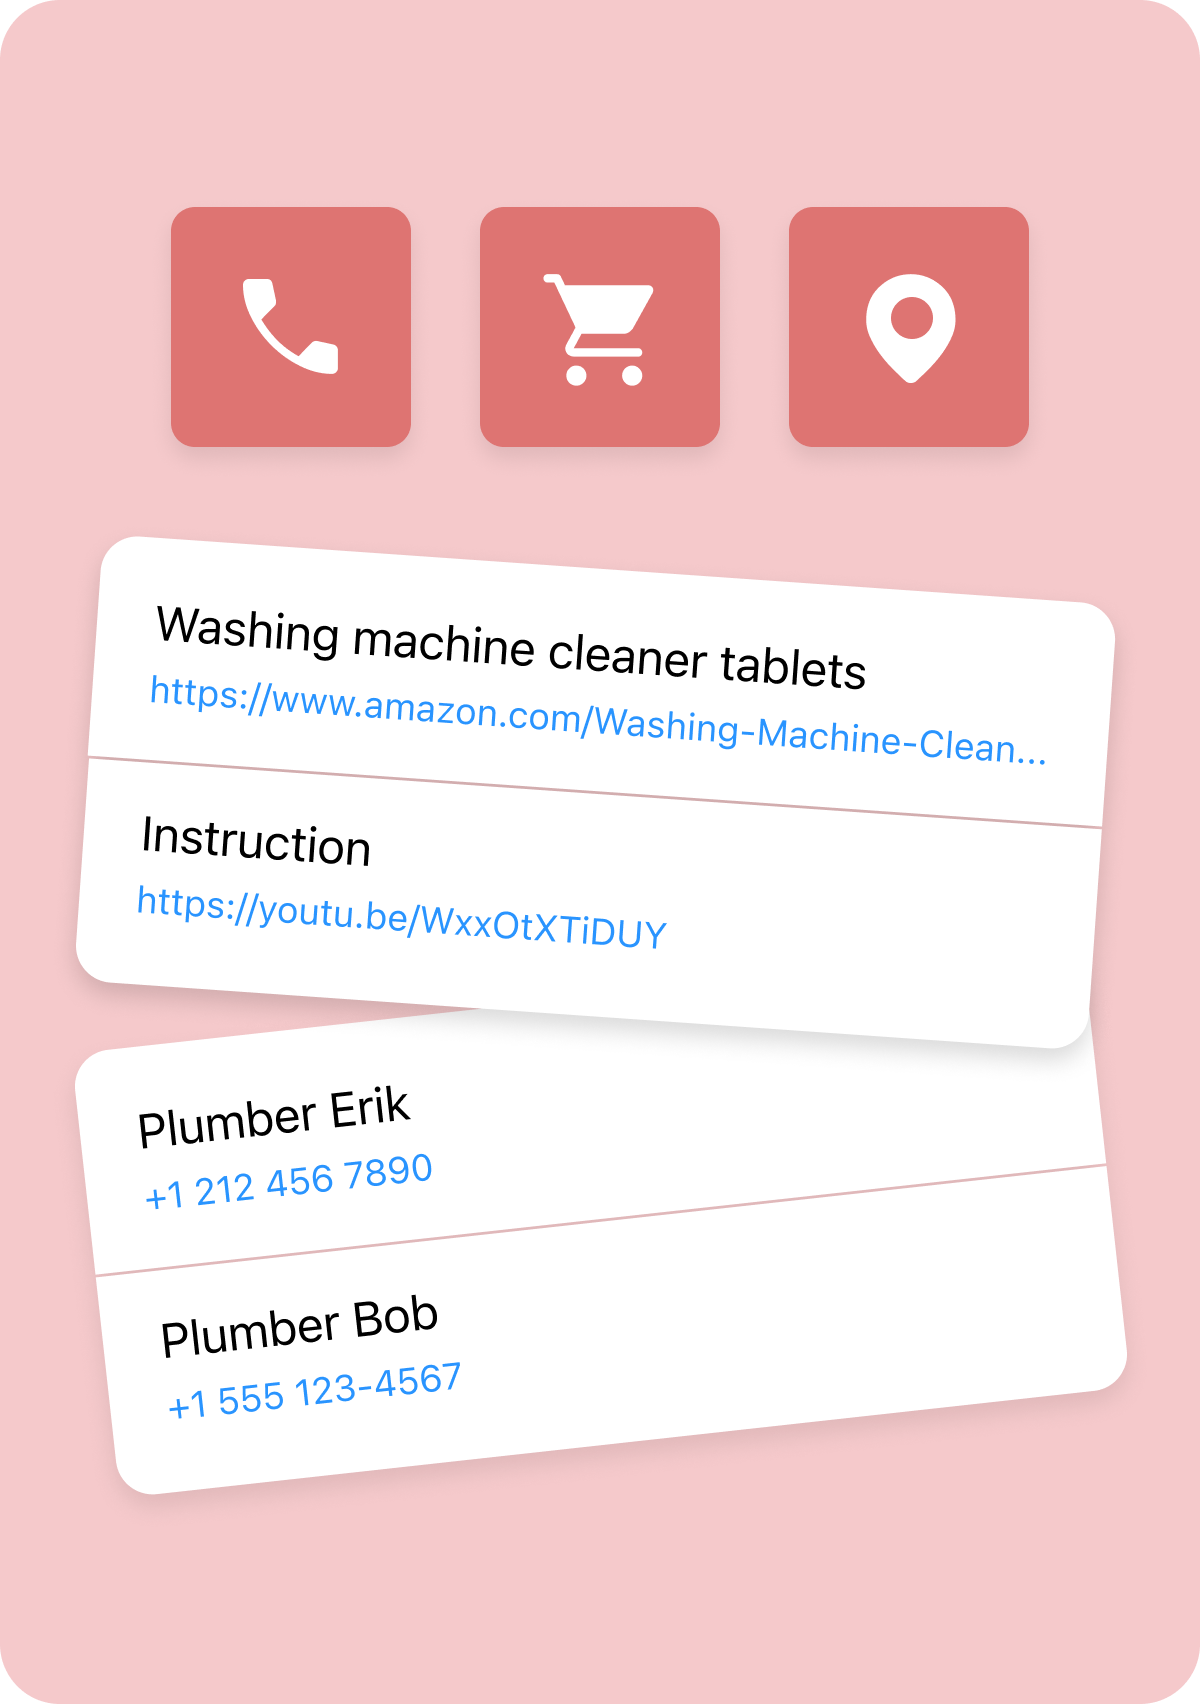 Plumber phone number and links to buy supplies for washing machine.